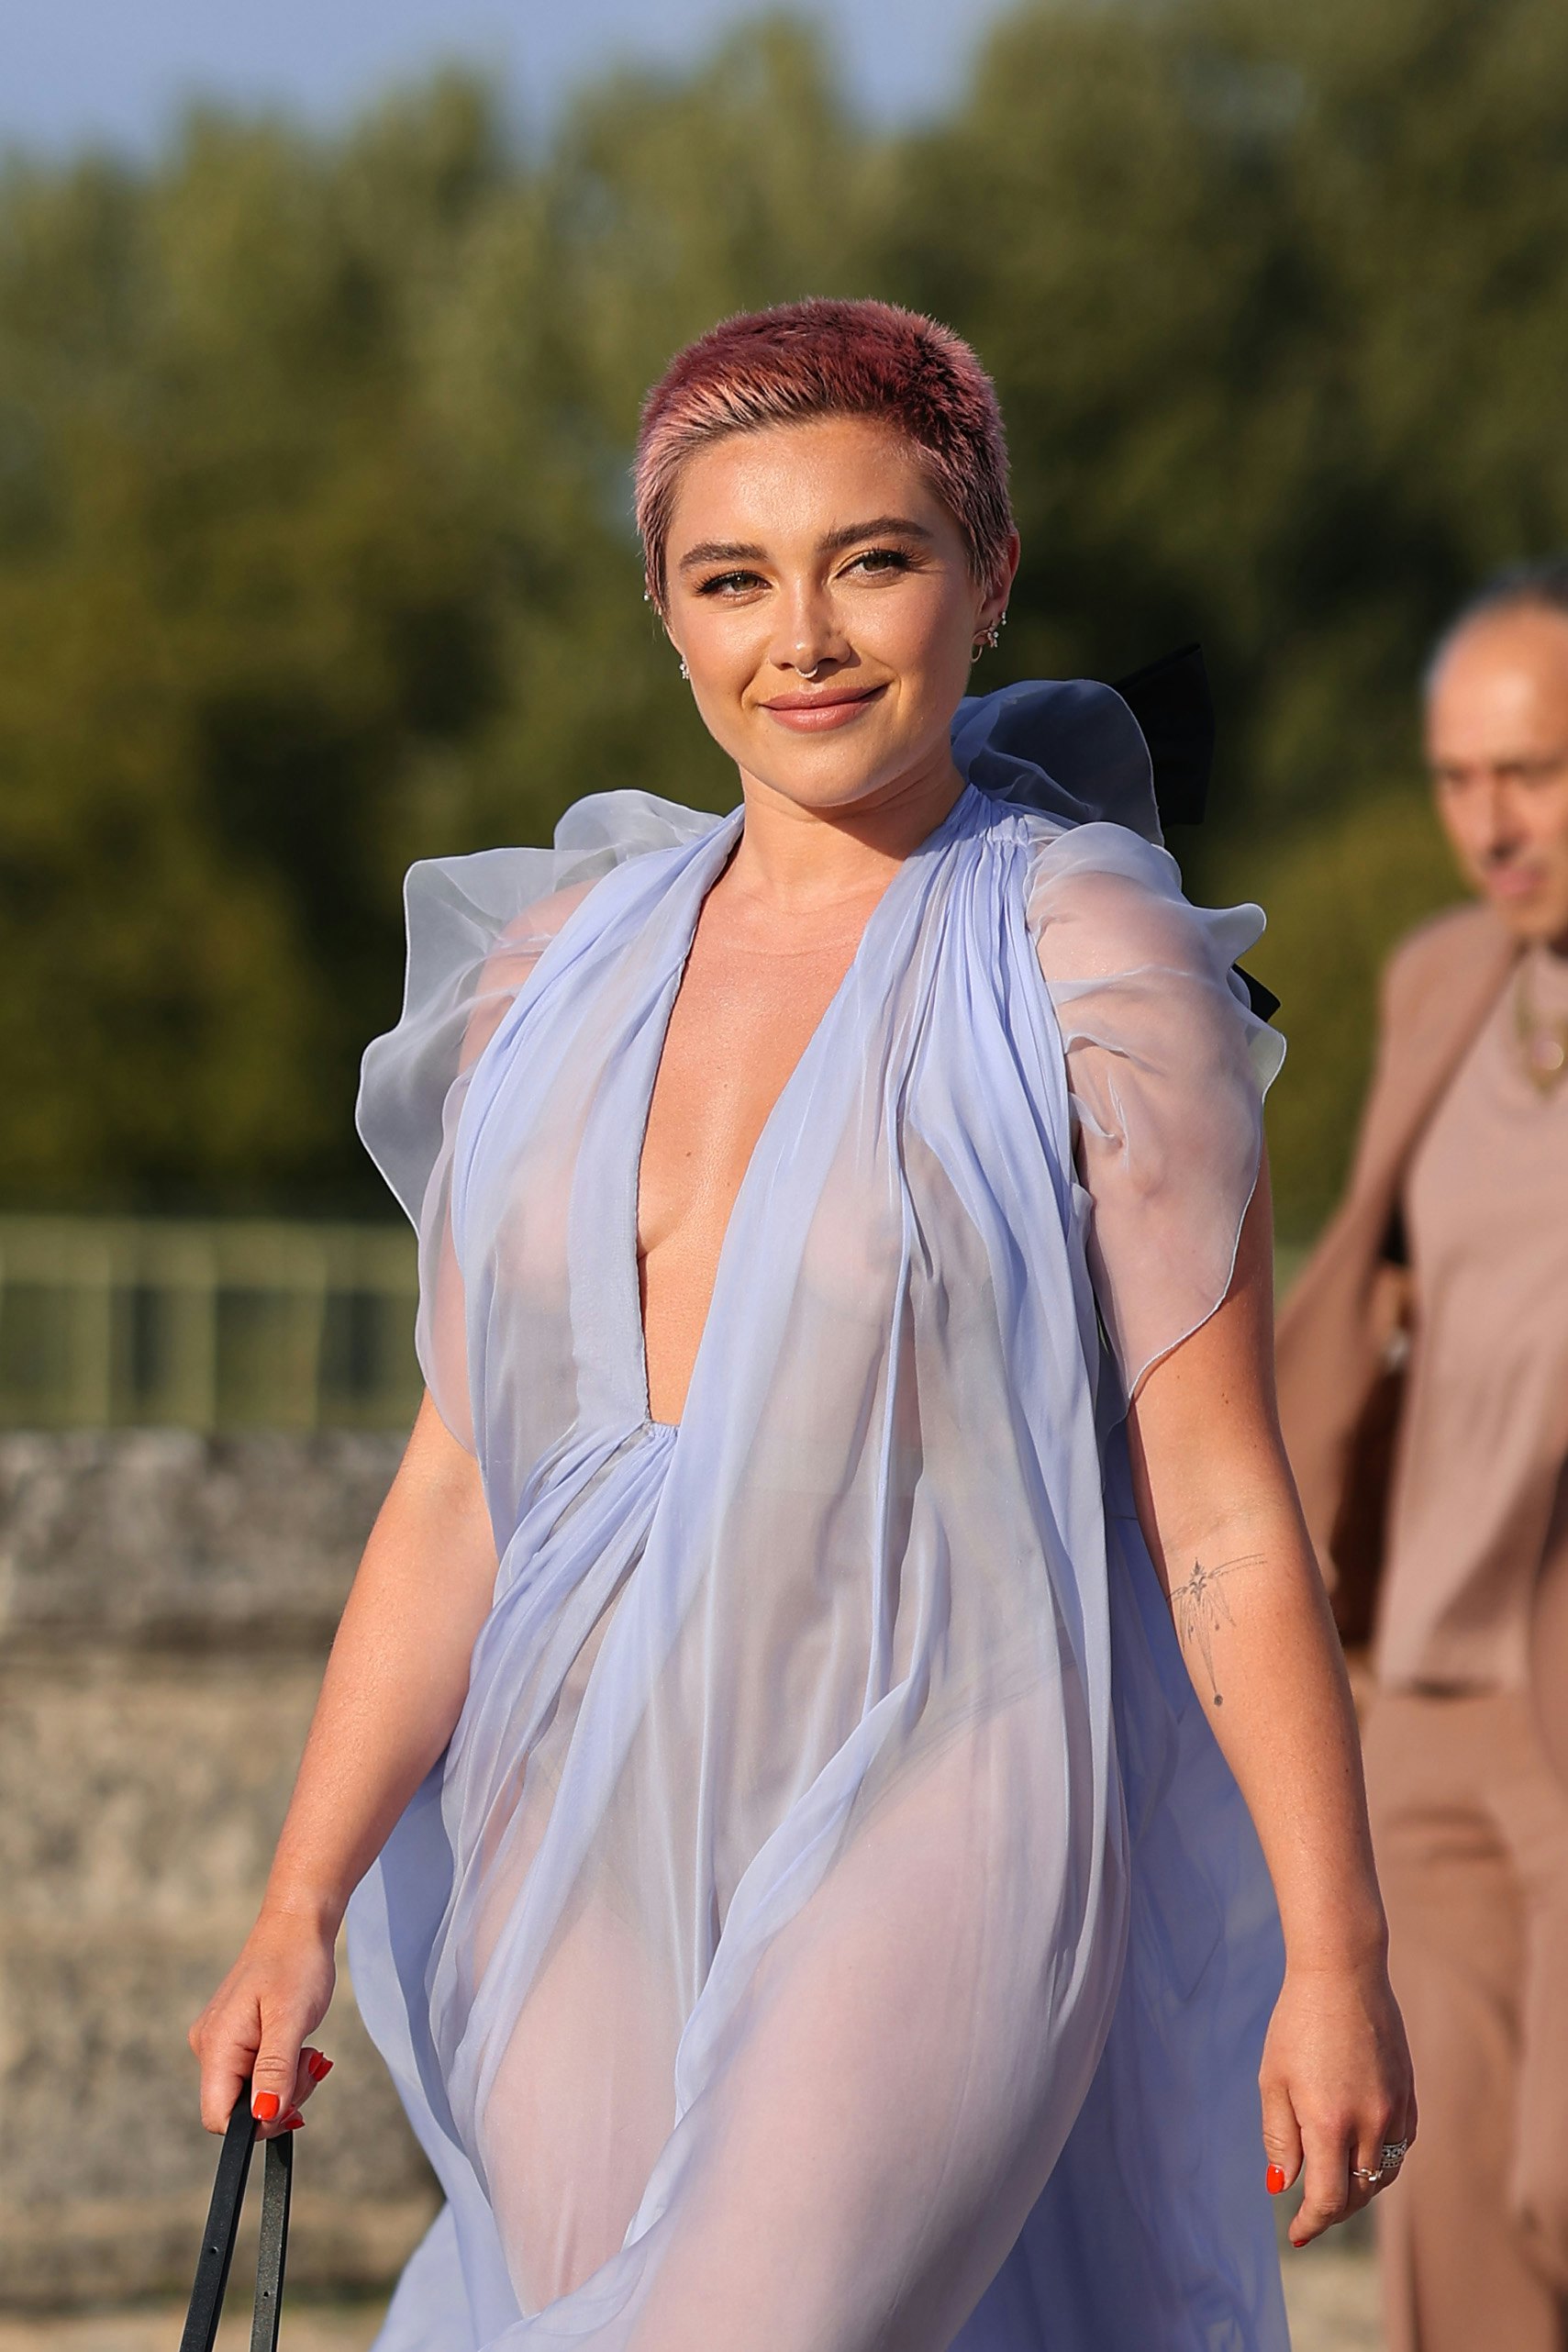 5 Times Florence Pugh Made Freeing The Nipple Look Stylish As Hell